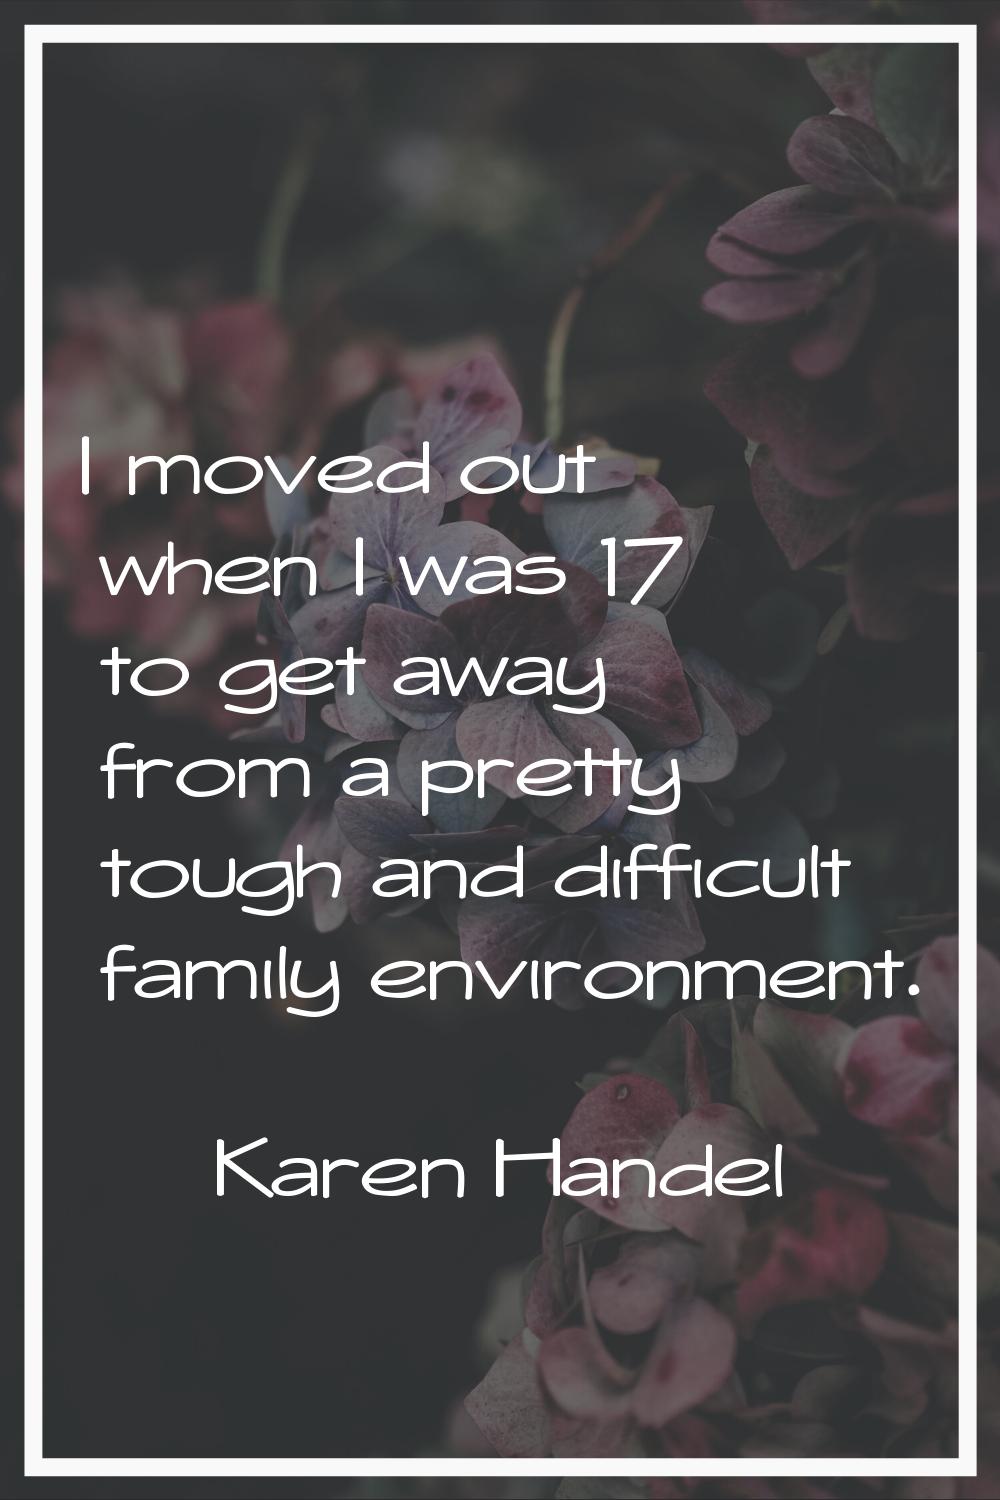 I moved out when I was 17 to get away from a pretty tough and difficult family environment.